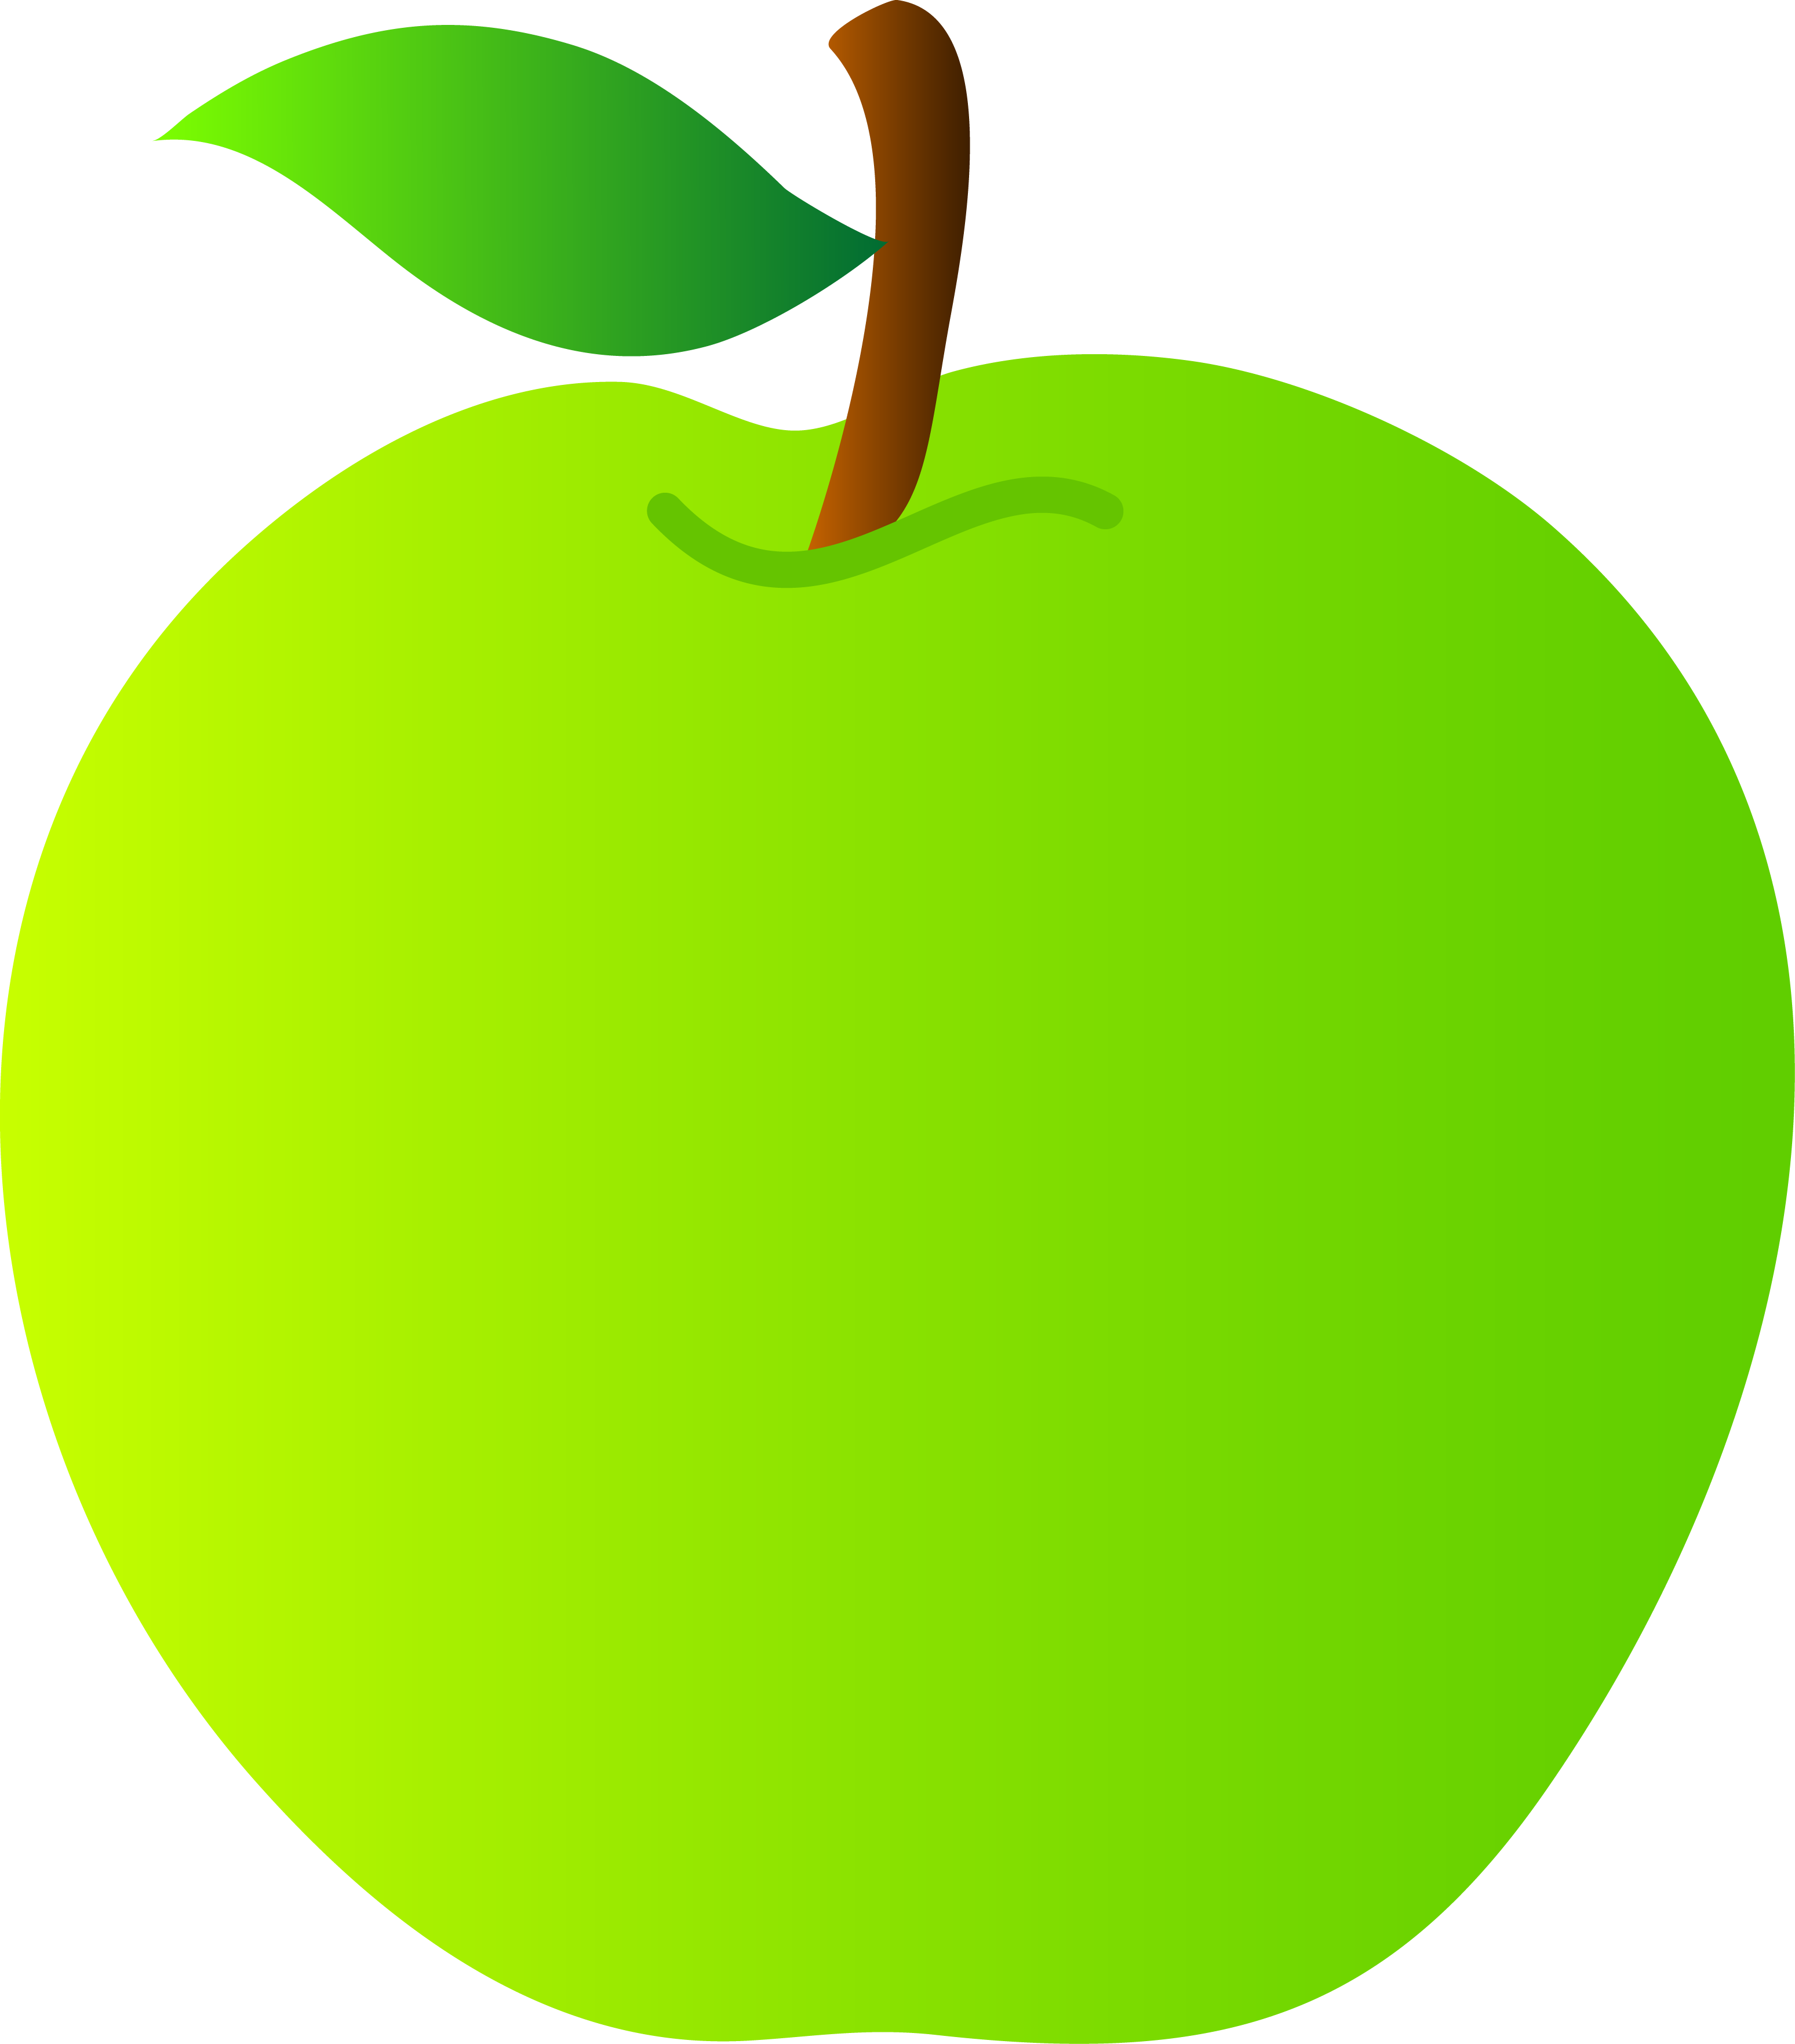 Free Clipart Of Apples